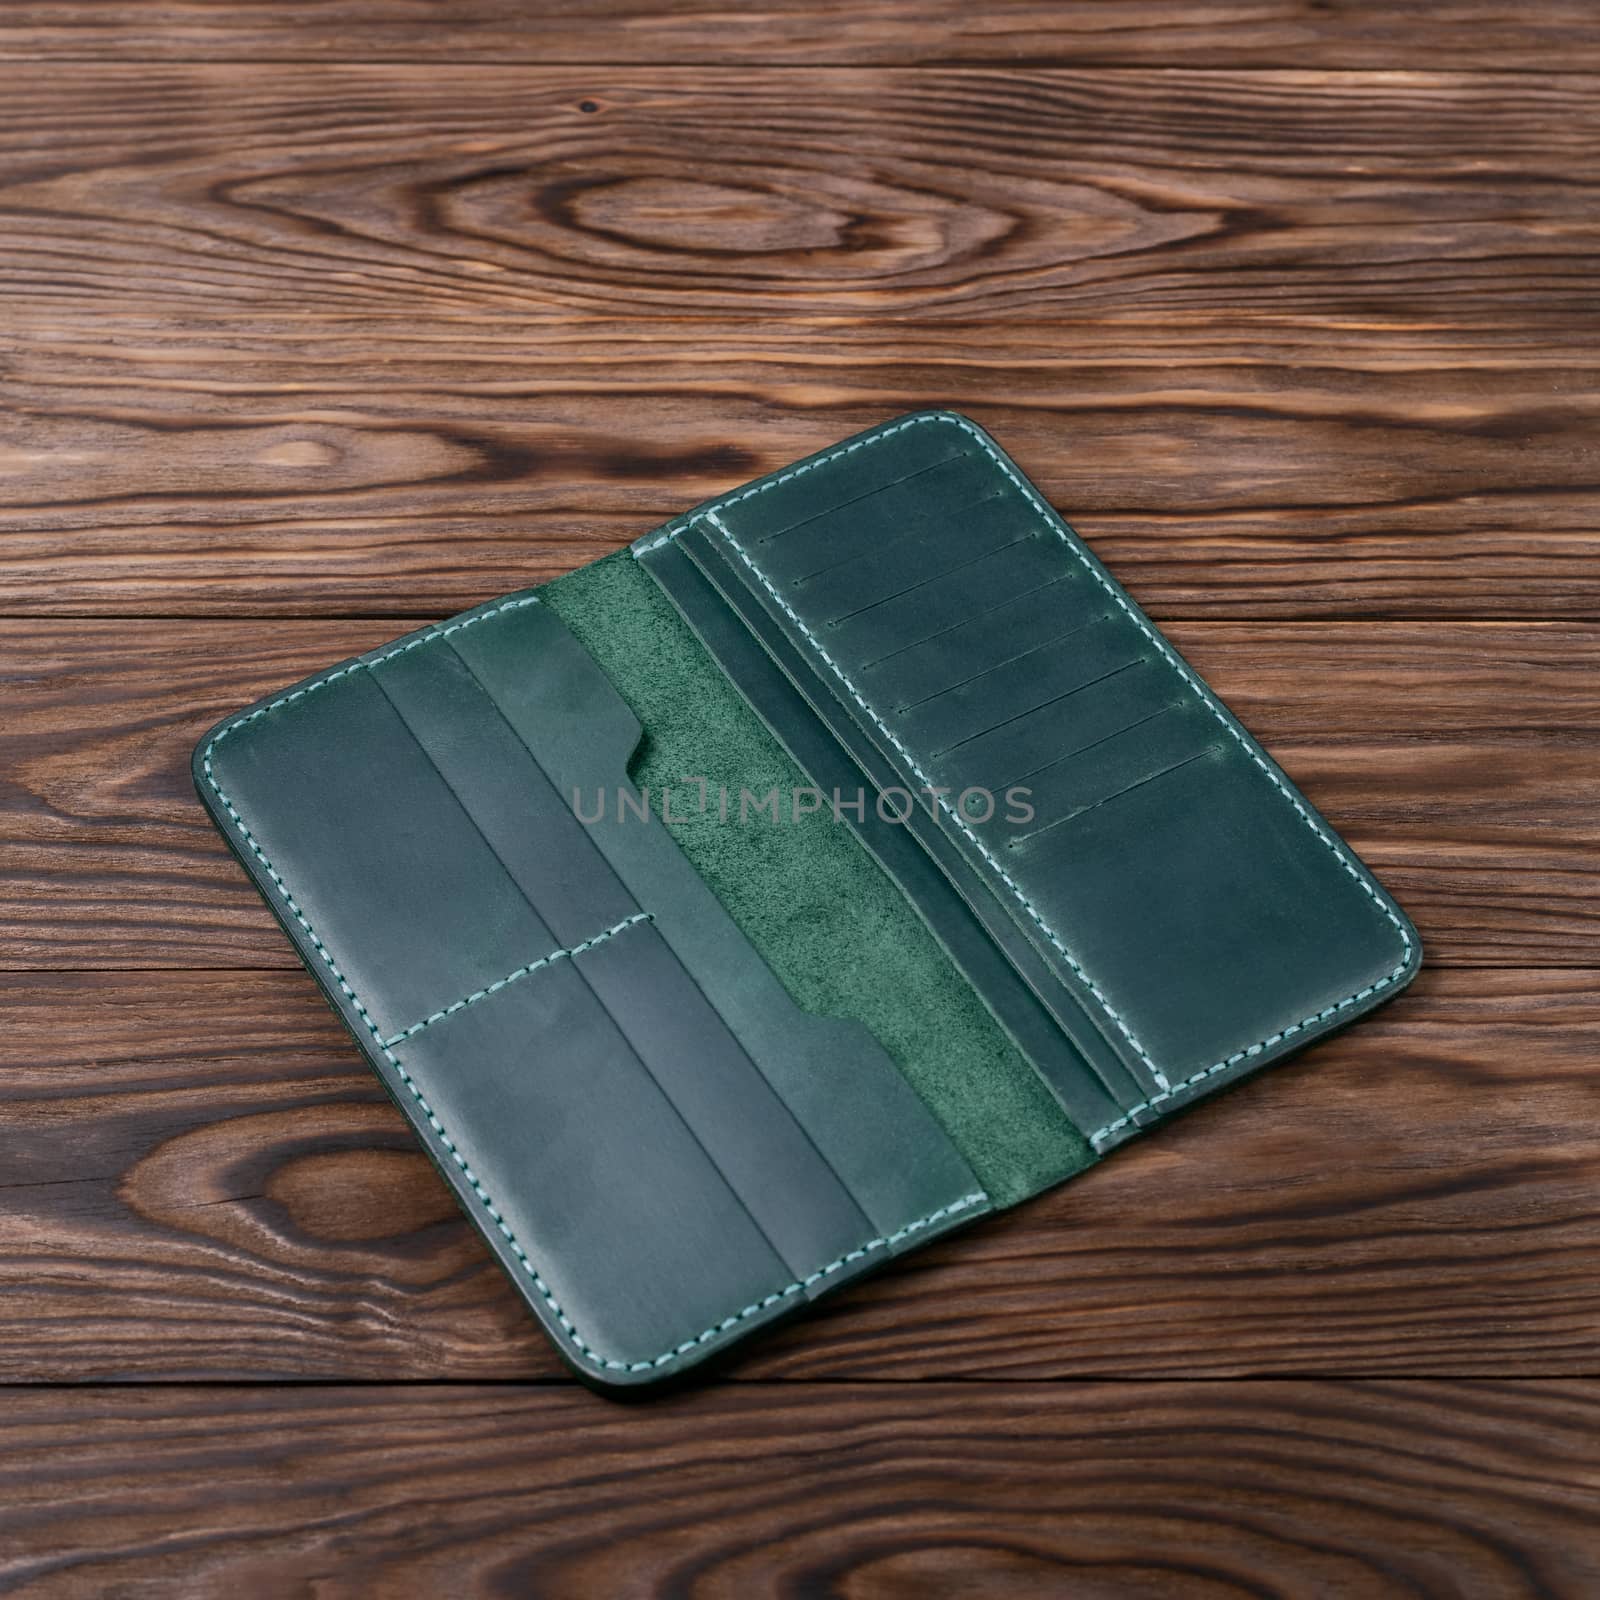 Green color handmade leather porte-monnaie on wooden textured background. Purse is opened and empty. Side view. Stock photo of luxury accessories. by alexsdriver